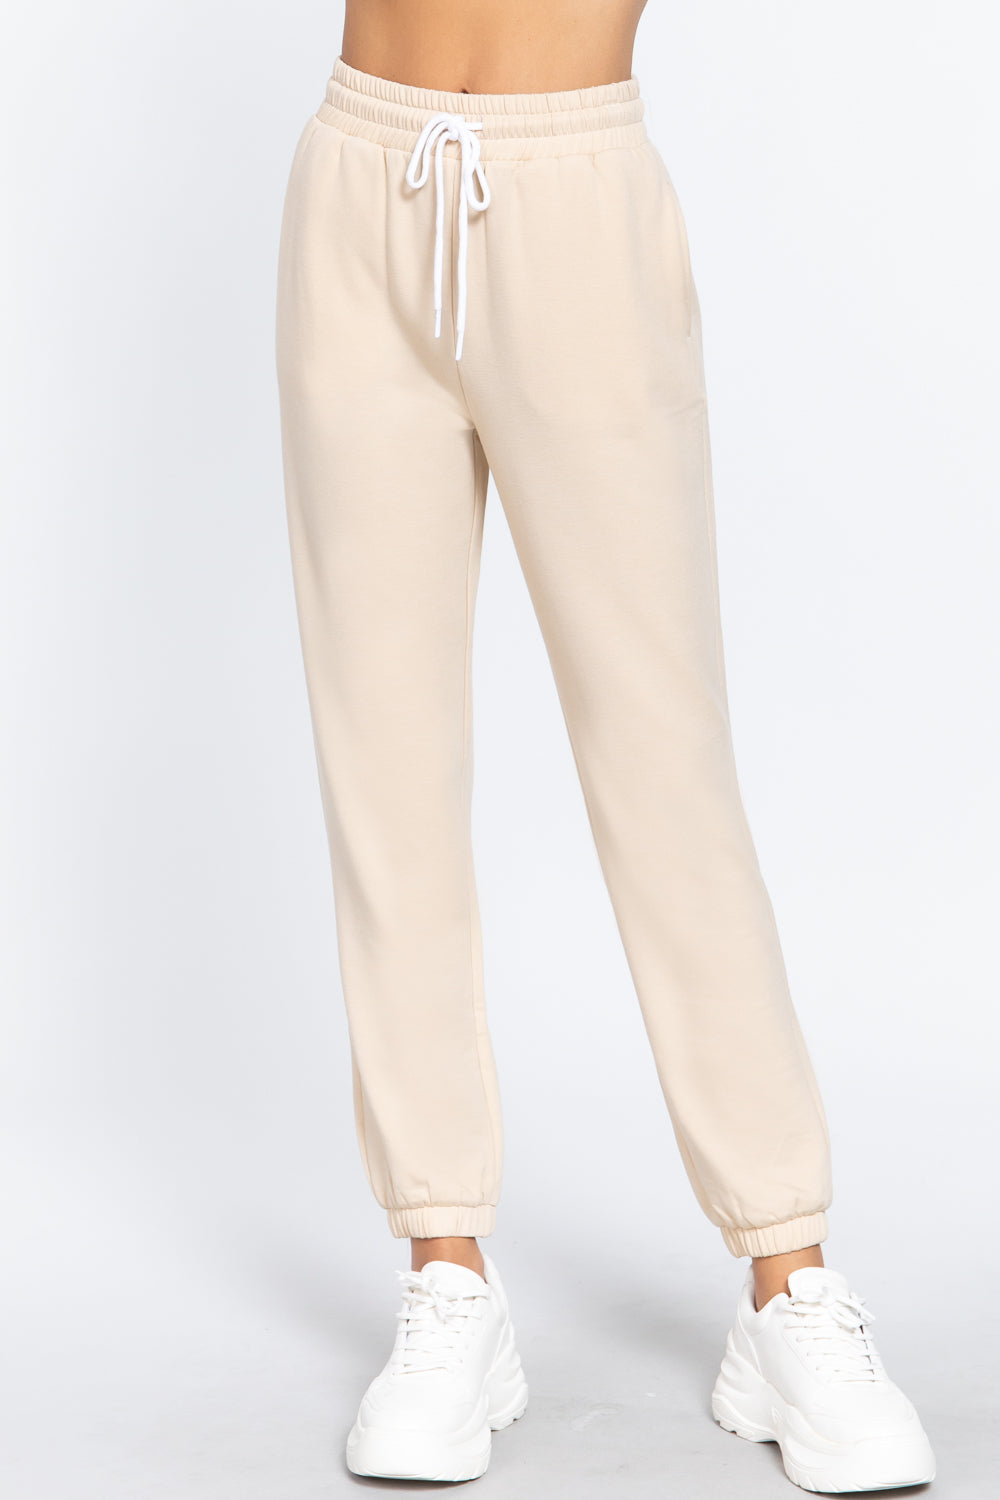 Fleece French Terry Jogger Bottoms jehouze 